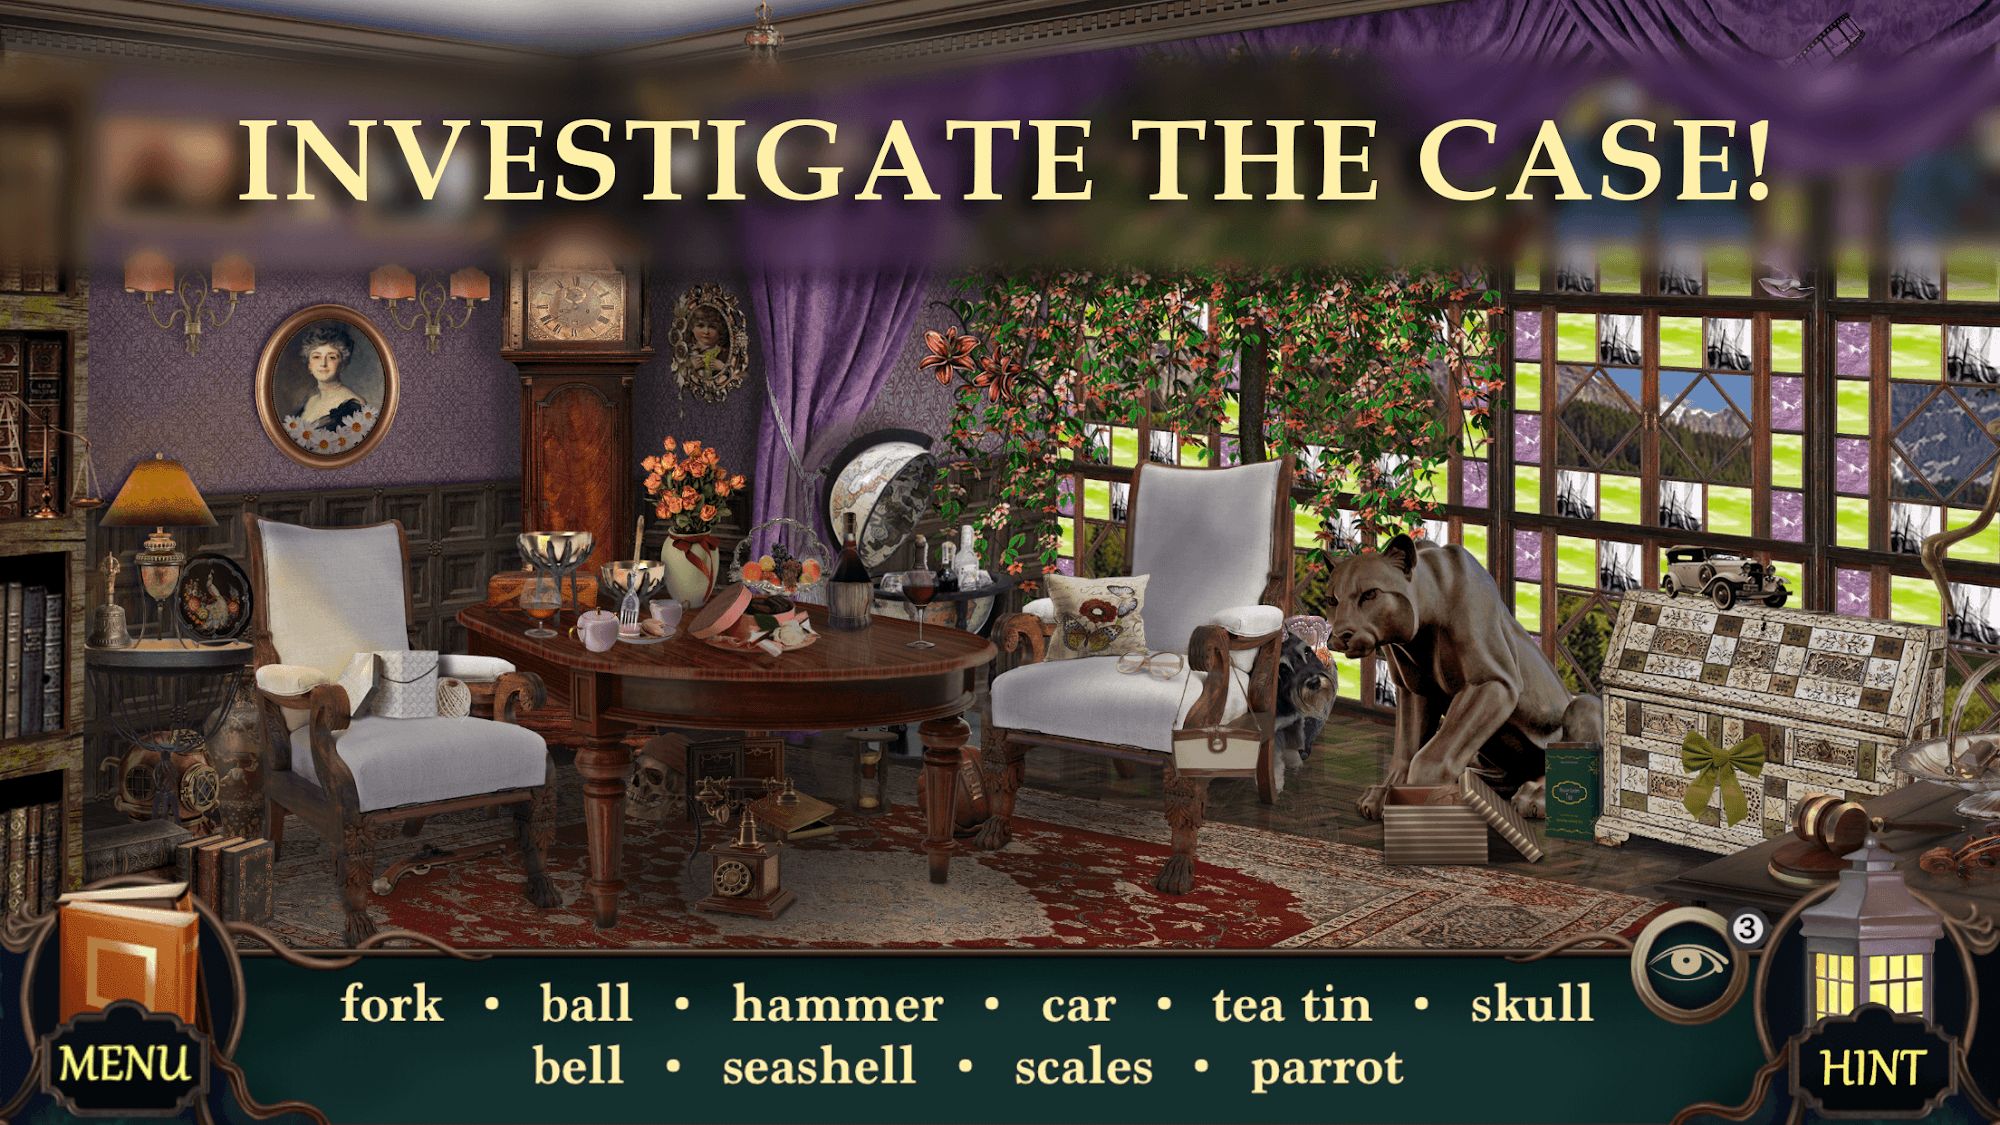 Full version of Android Hidden objects game apk Mystery Hotel - Seek and Find Hidden Objects Games for tablet and phone.